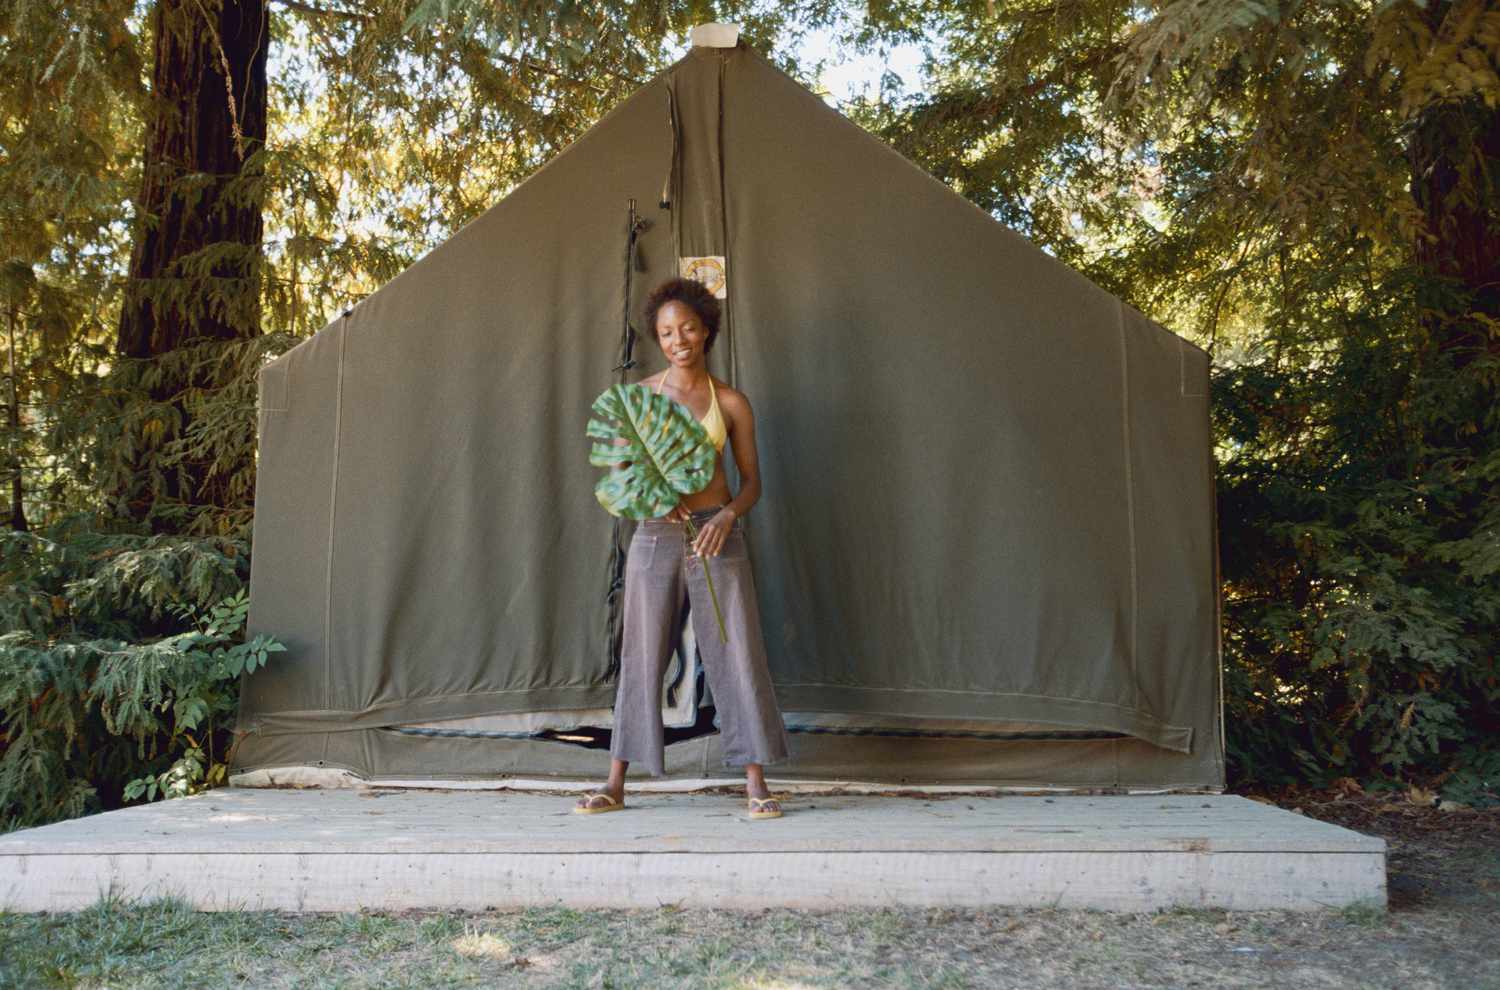 Woman holding leaf outside tent on concrete slab.